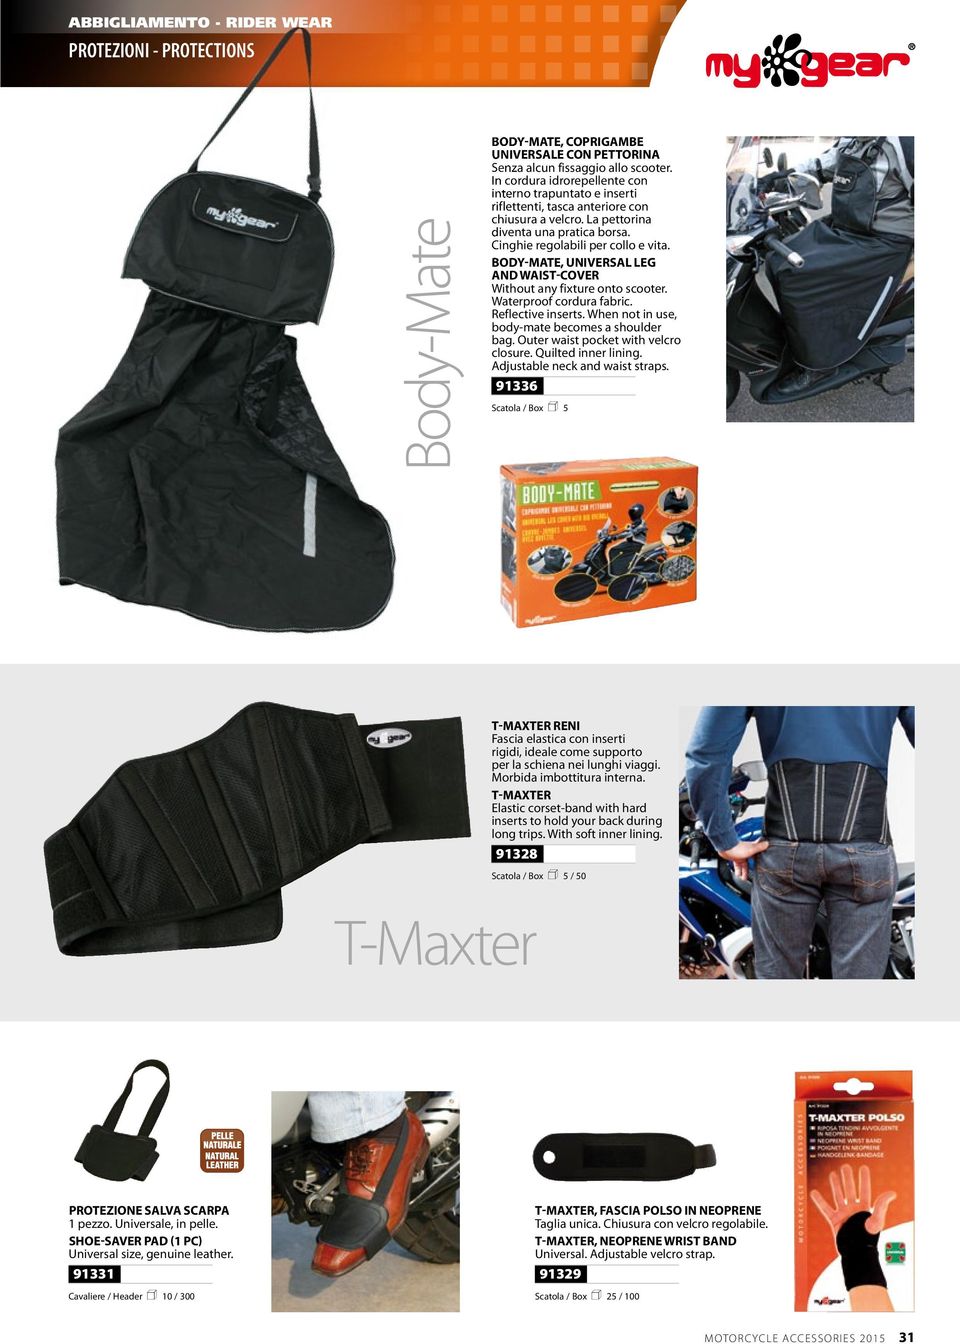 BODY-MATE, UNIVERSAL LEG AND WAIST-COVER Without any fixture onto scooter. Waterproof cordura fabric. Reflective inserts. When not in use, body-mate becomes a shoulder bag.